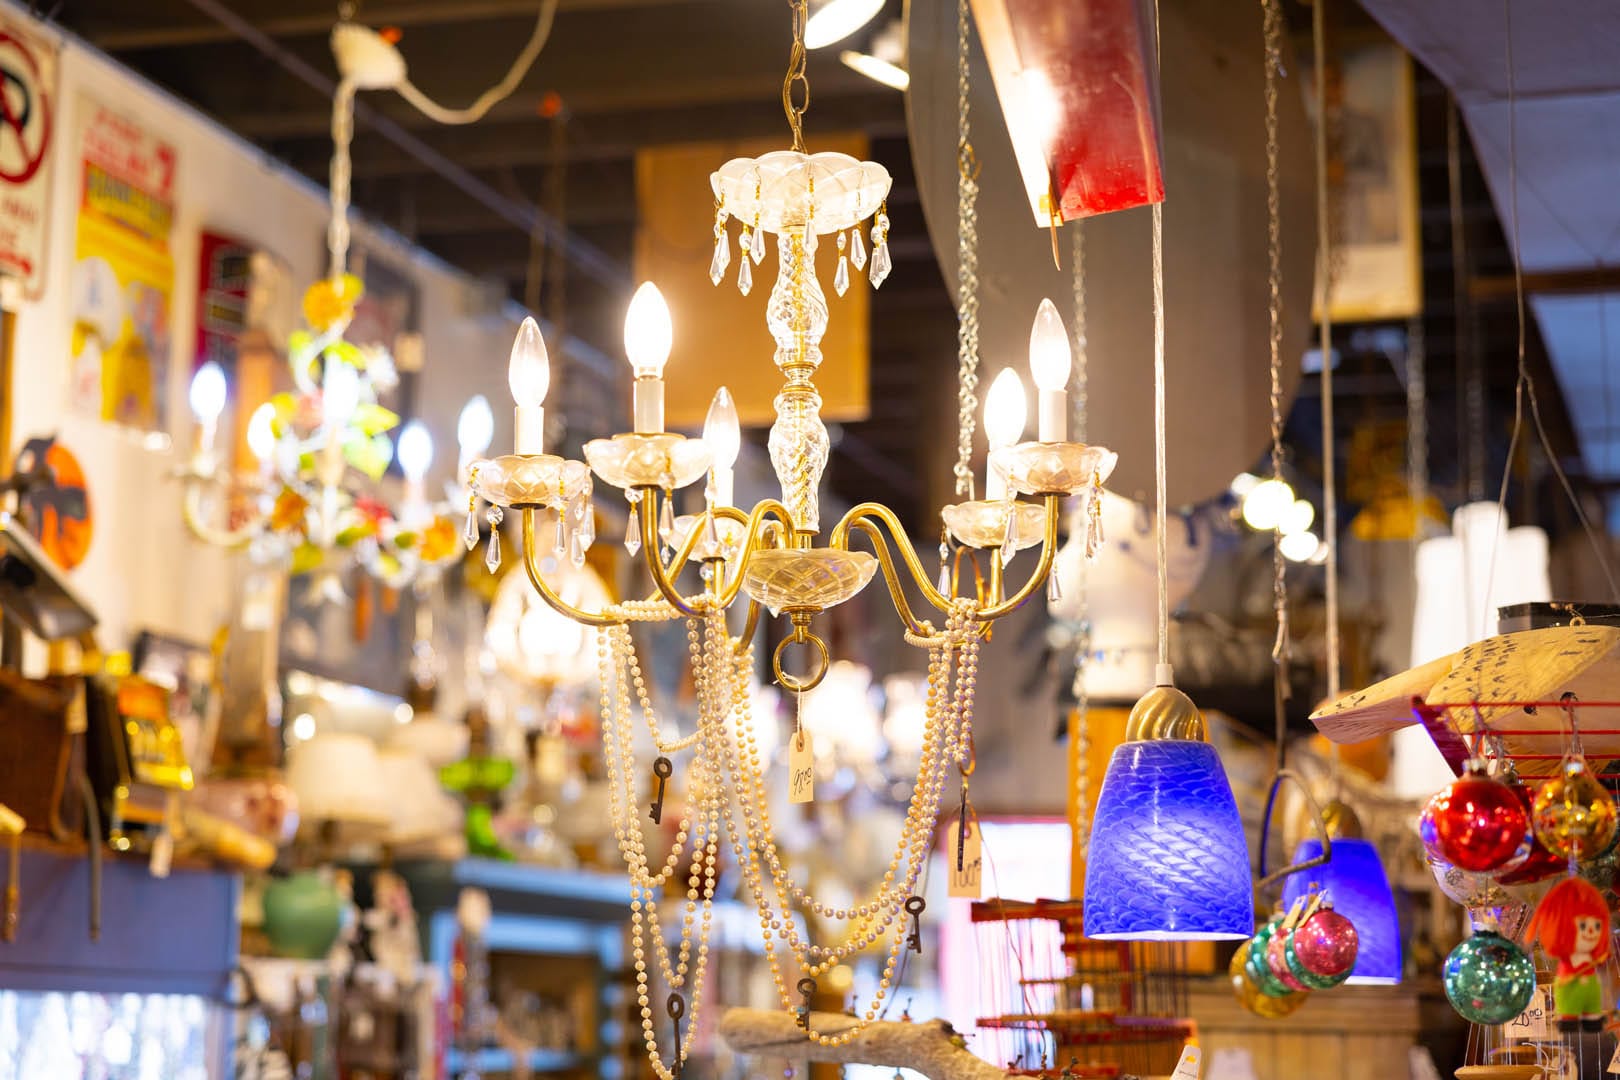 Antique lamps and lights and Christmas ornaments hang from the ceiling in an antique store.